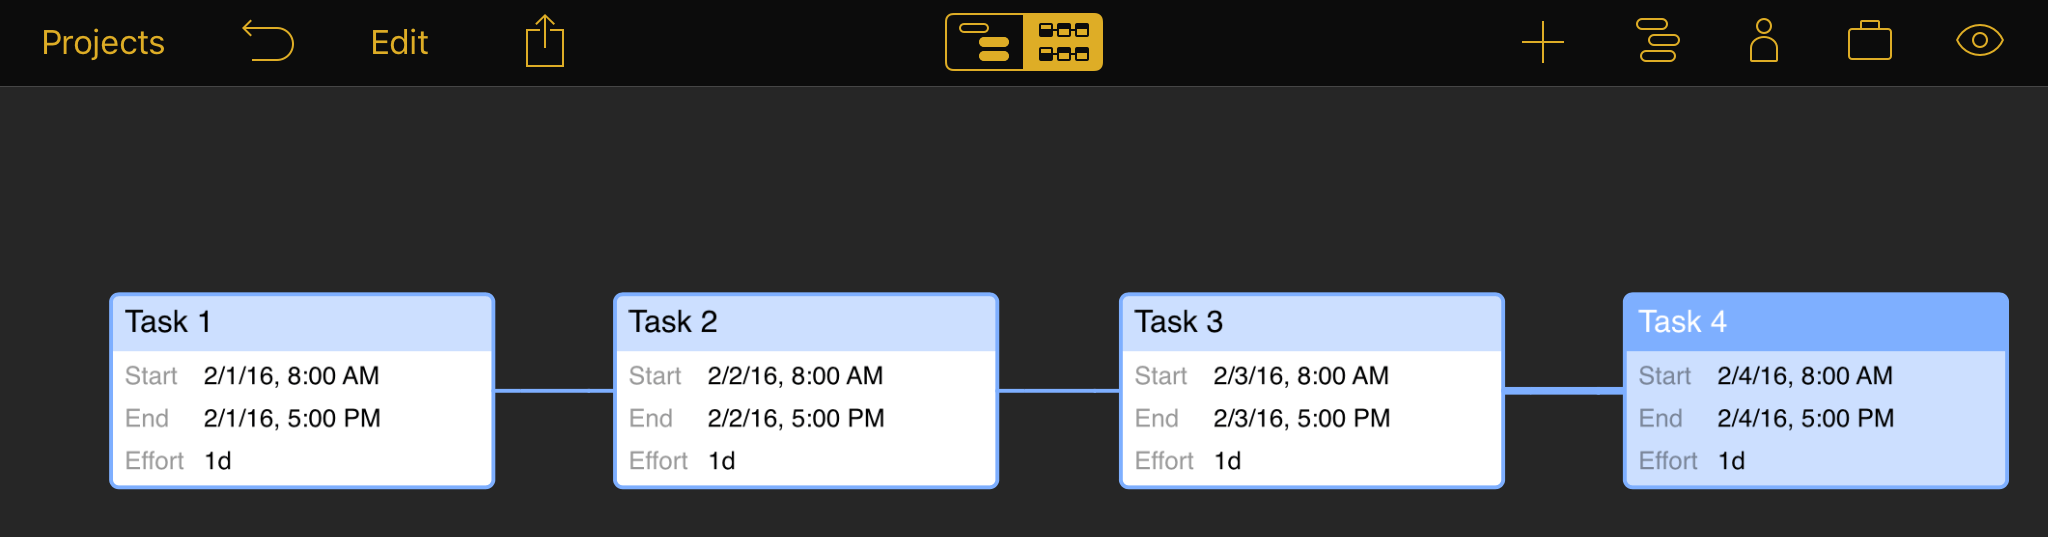 A chain of tasks in Network View, all with finish-start dependencies.